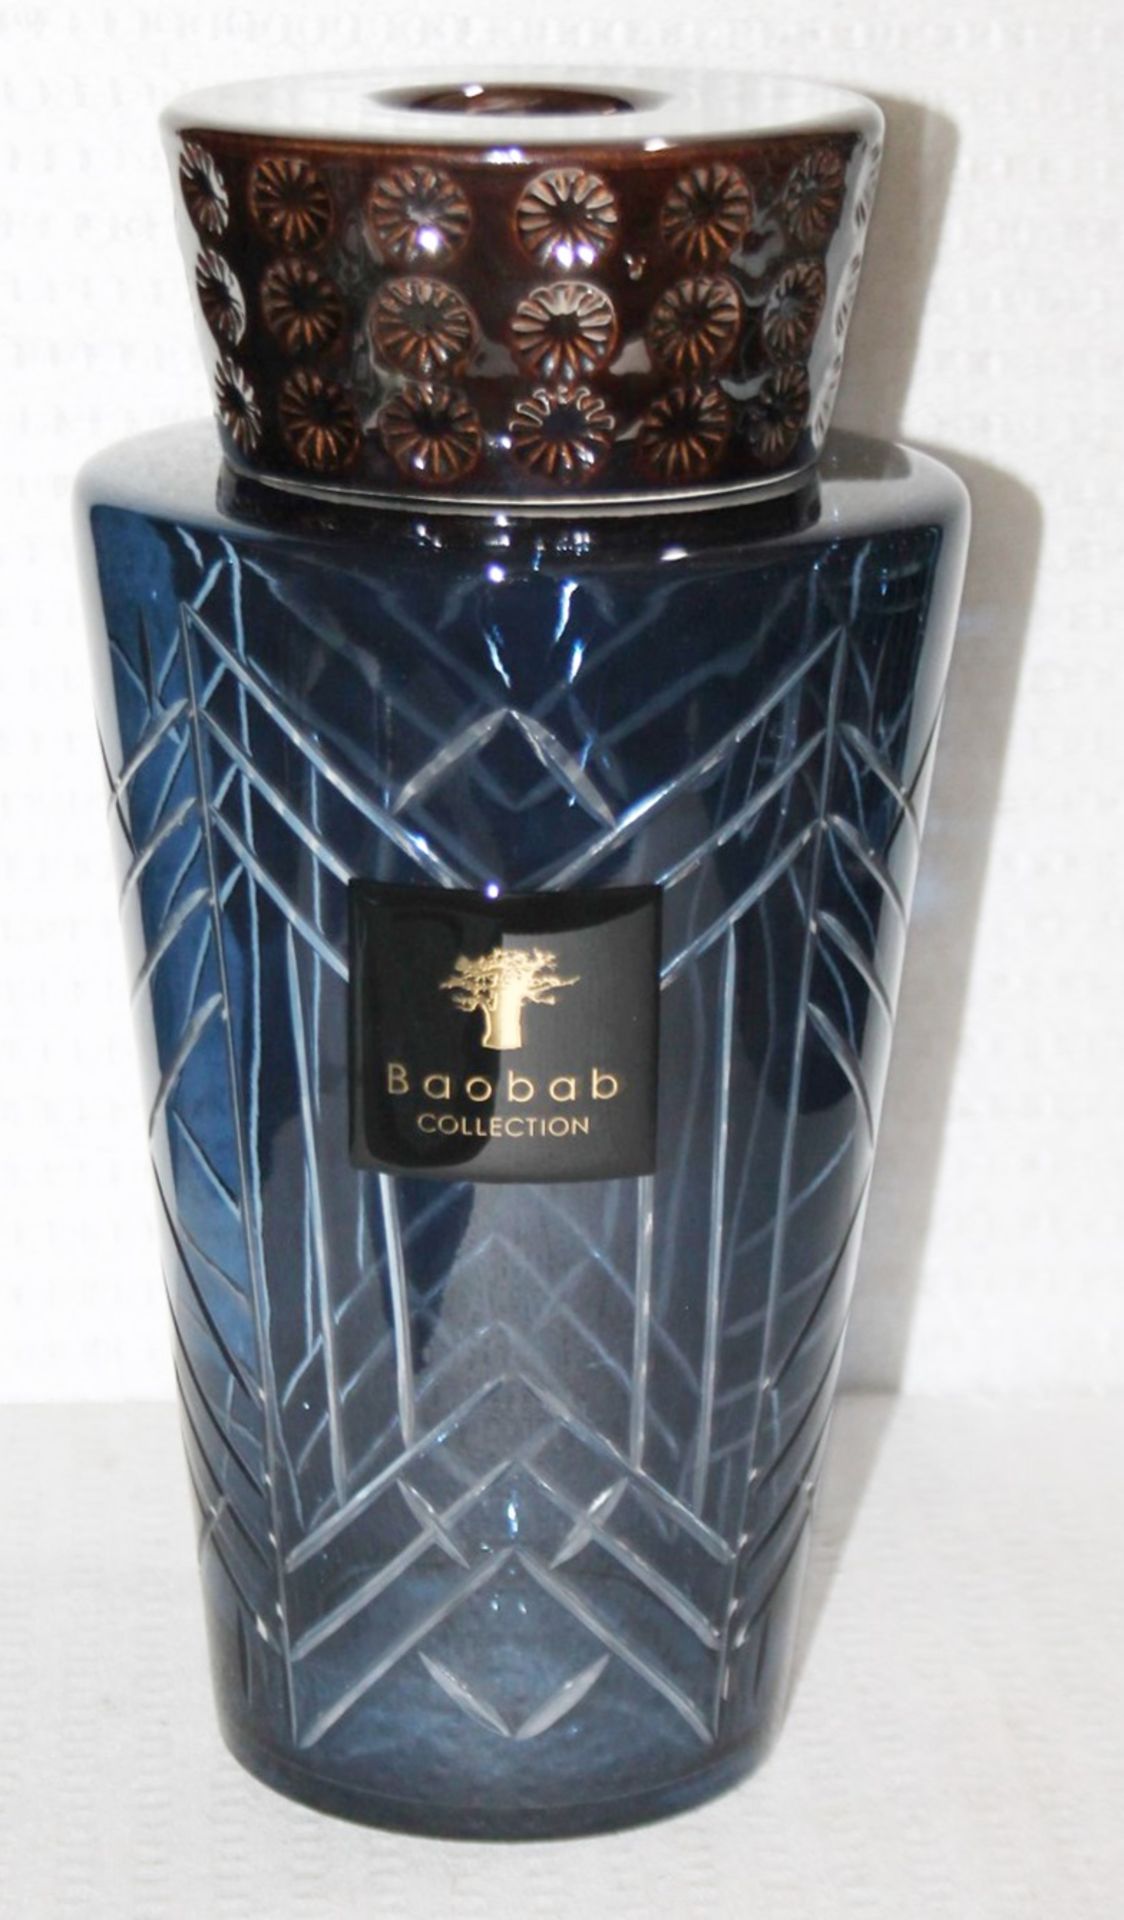 1 x BAOBAB COLLECTION 'Swann High Society' 5L Totem Diffuser - Original Price £715.00 - Image 2 of 8